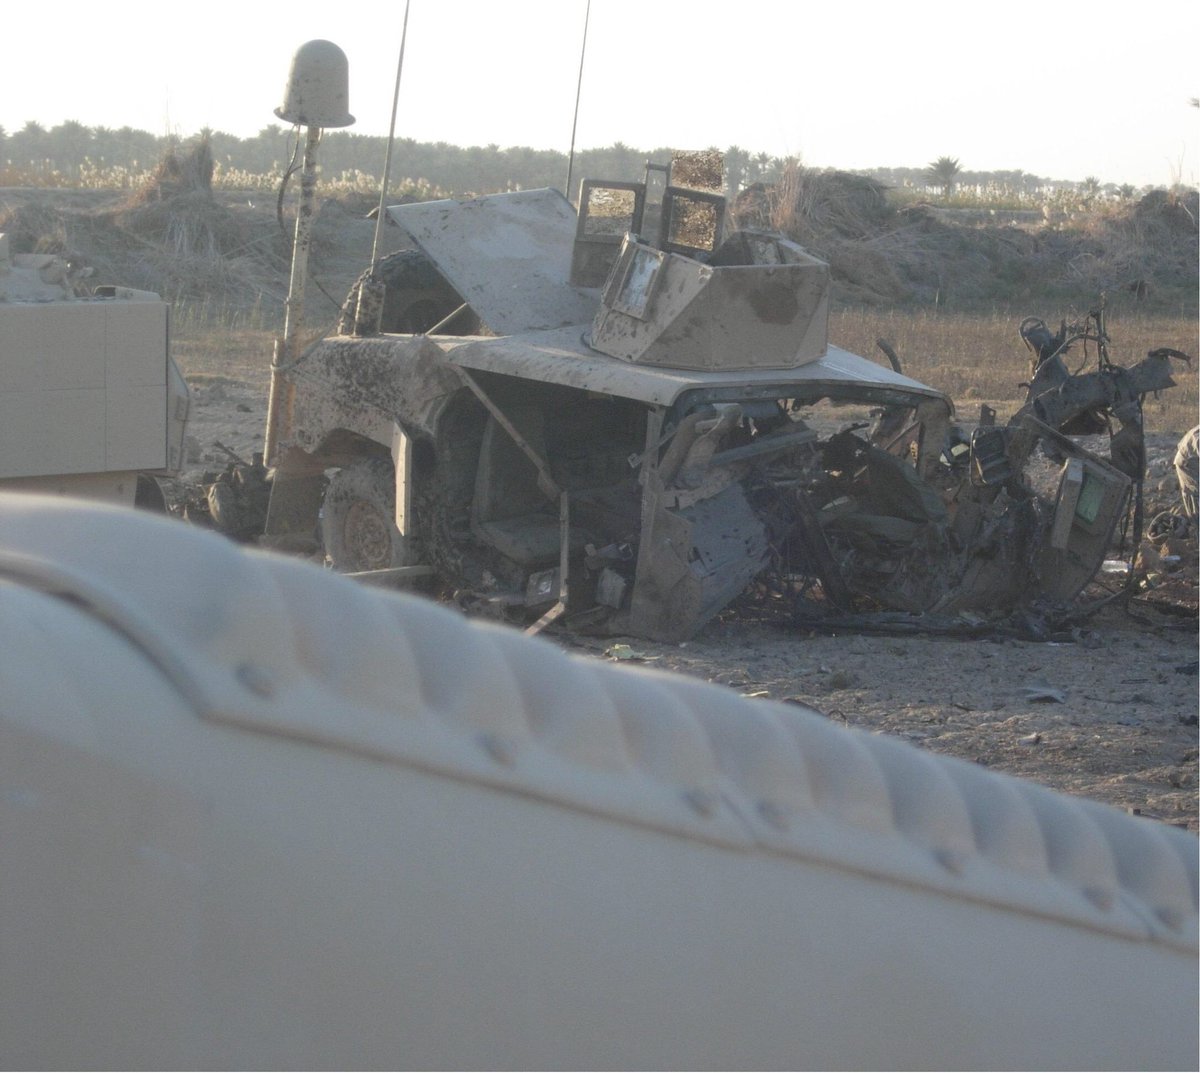 I opened my eyes and saw our heavily armored 12,000 lb M114 HMMWV completely destroyed, laying on its side and facing the wrong direction. (The photo below was taken after it was tipped back on its bottom).